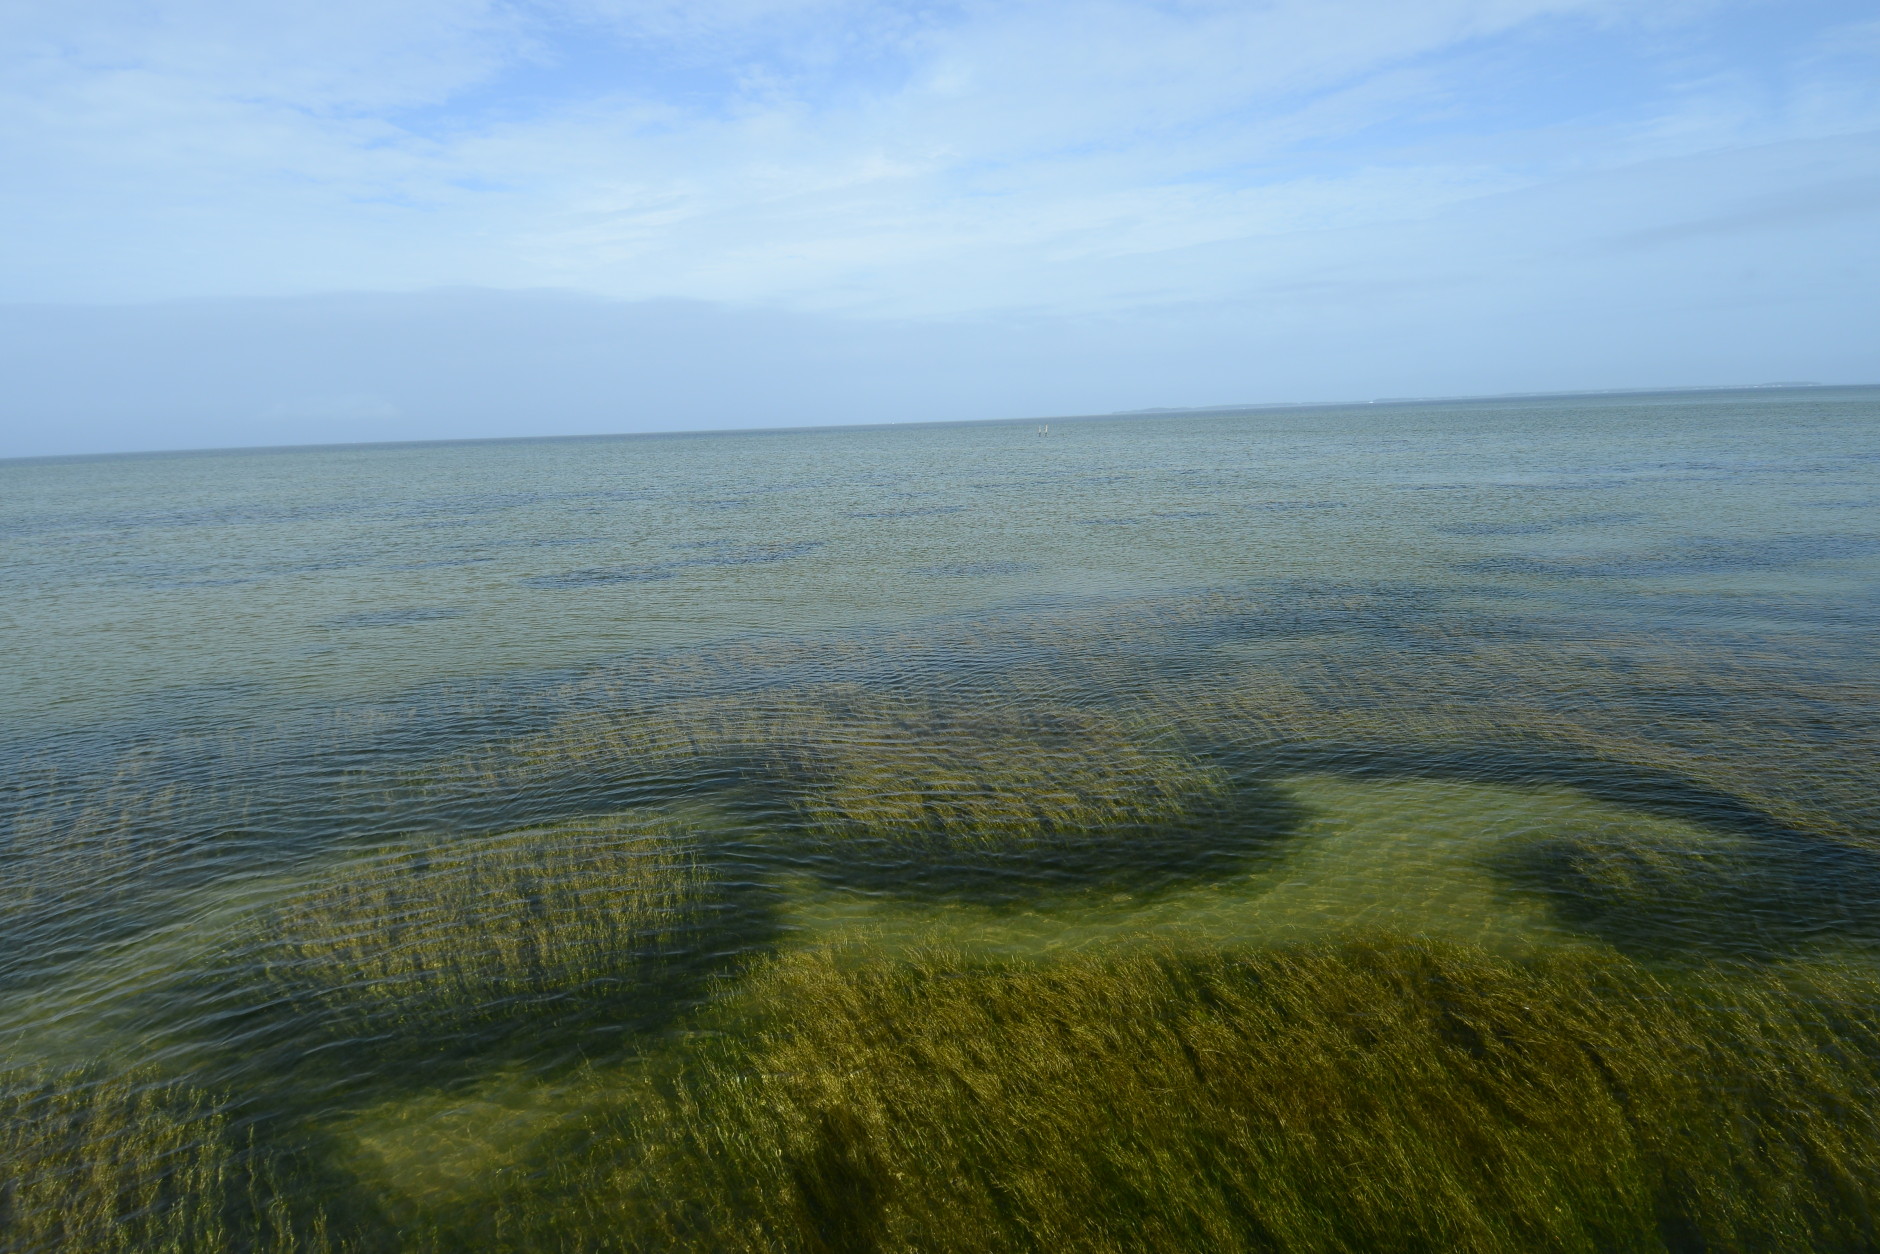 Healthy underwater grasses and clear water off Poplar Island, Md., in September 2015 are signs that the Chesapeake Bay water’s health is improving. (Courtesy Pete McGowan/U.S. Fish and Wildlife Service)